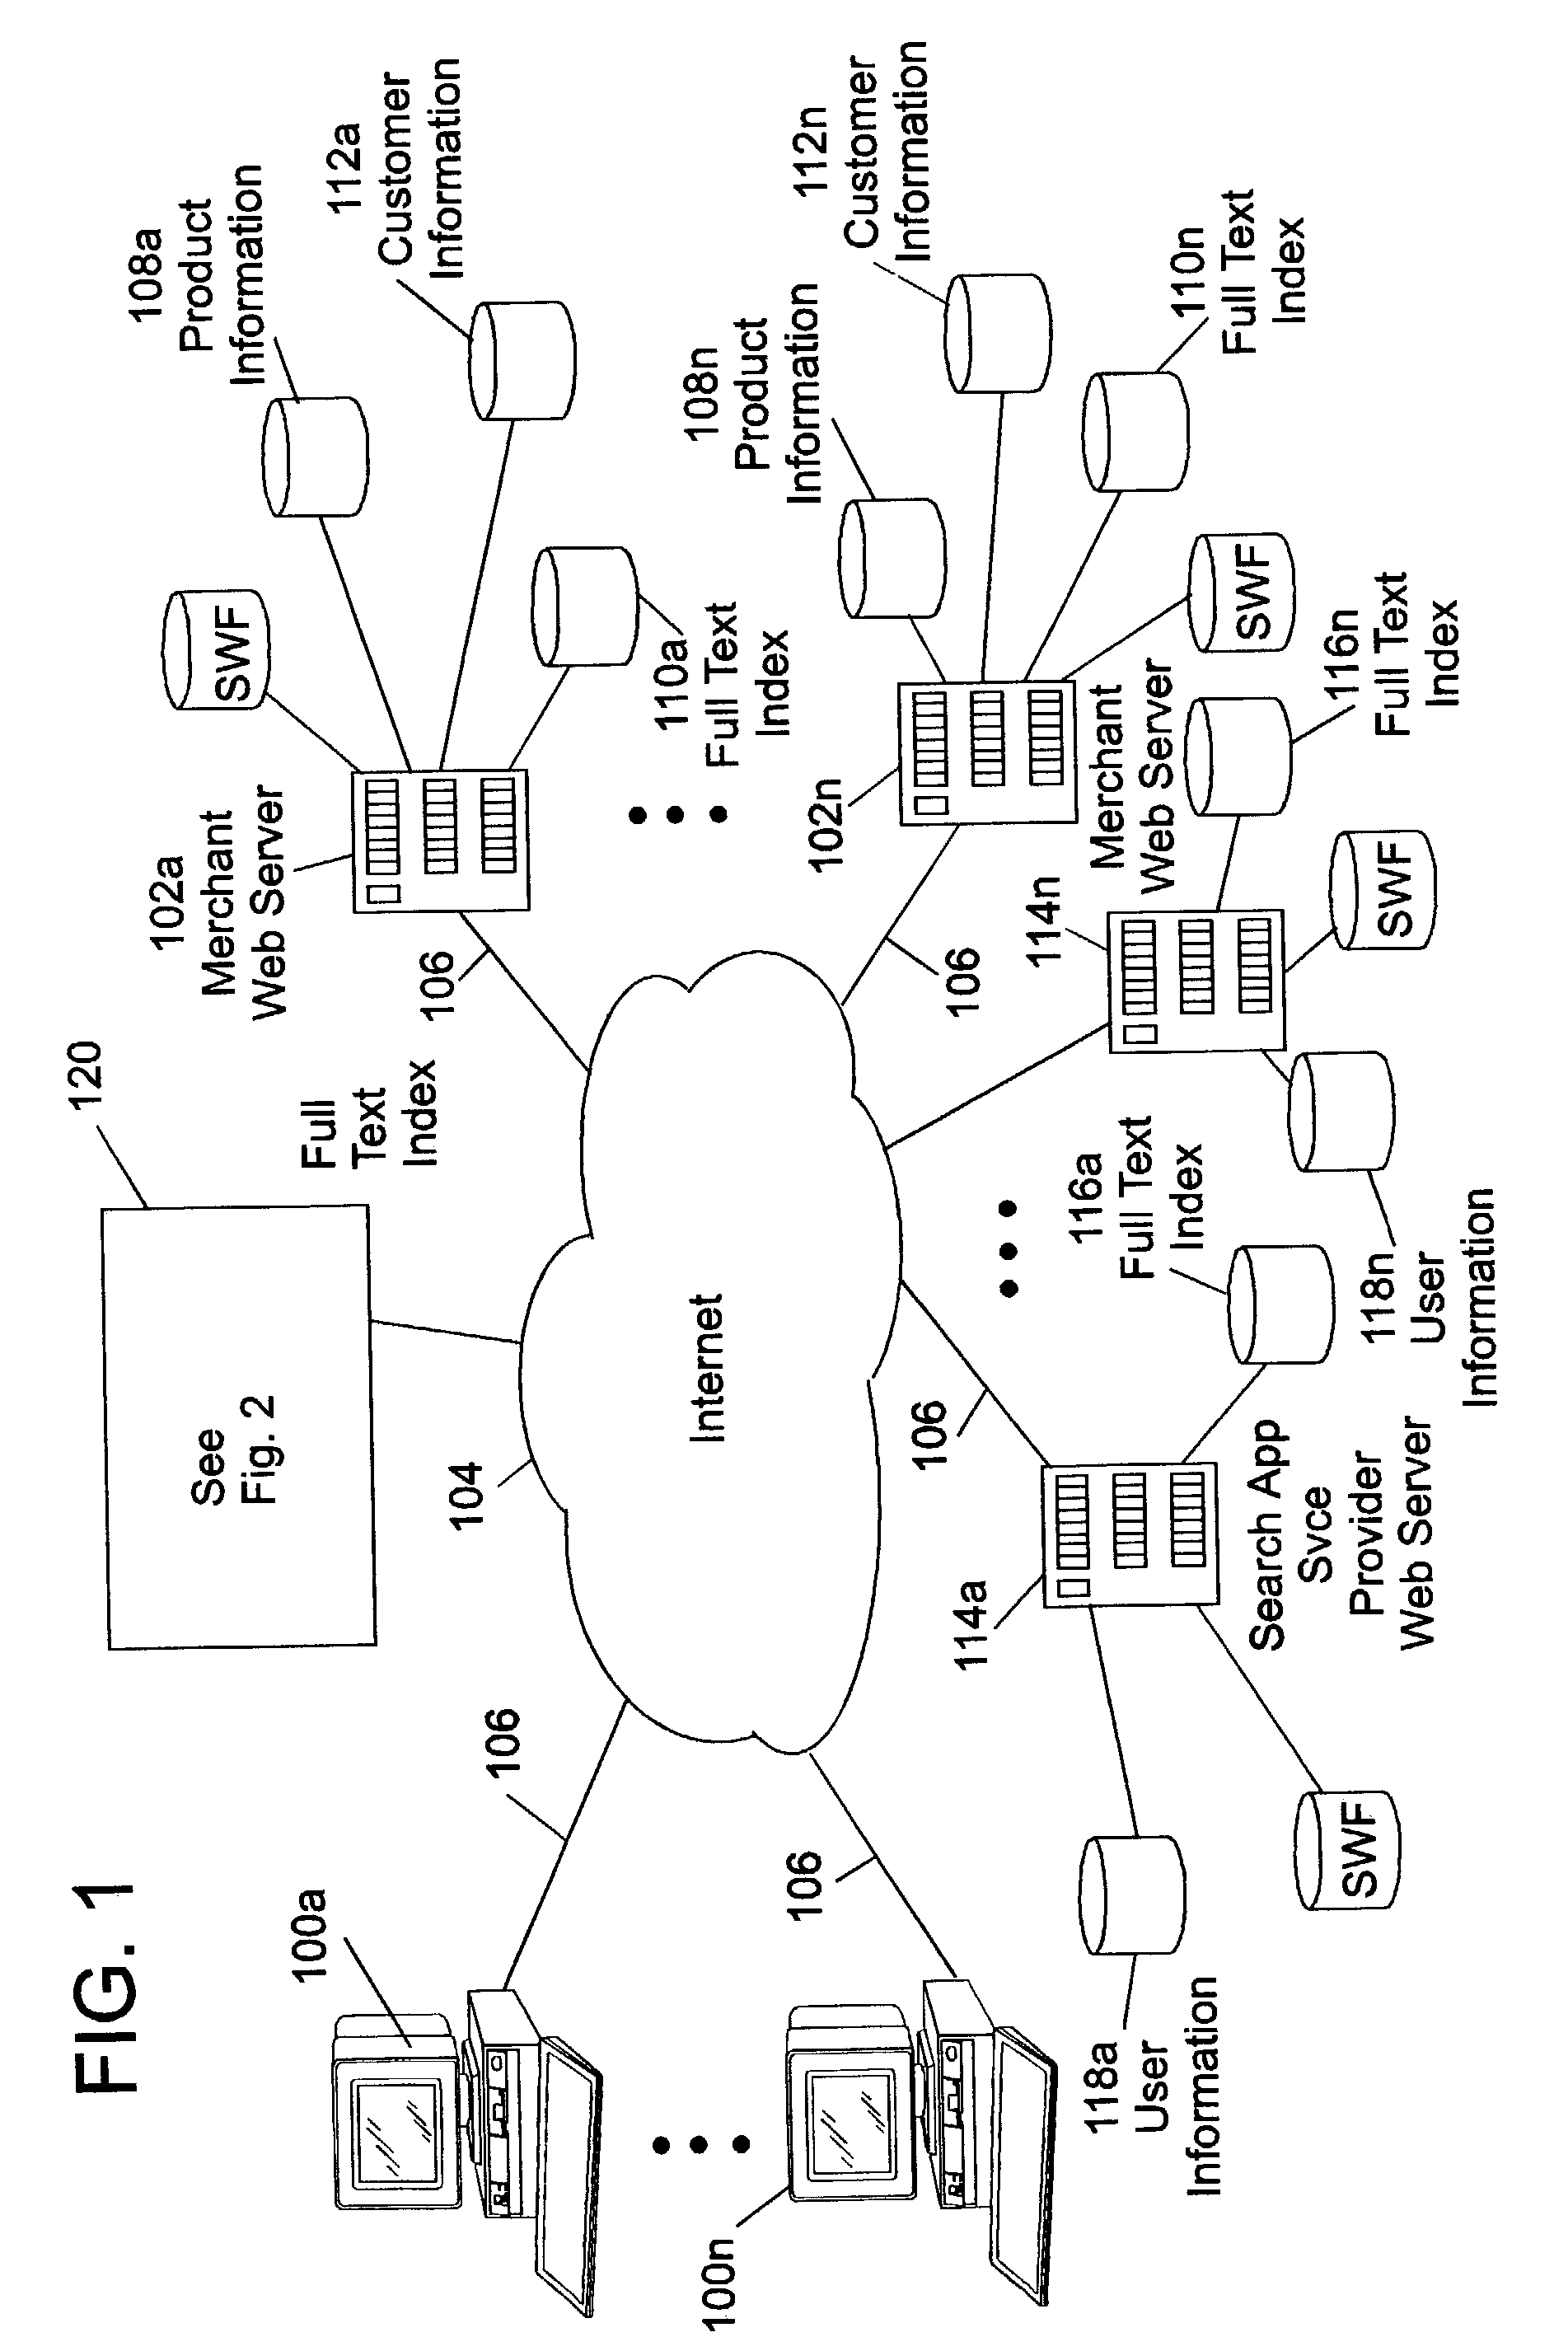 International information search and delivery system providing search results personalized to a particular natural language